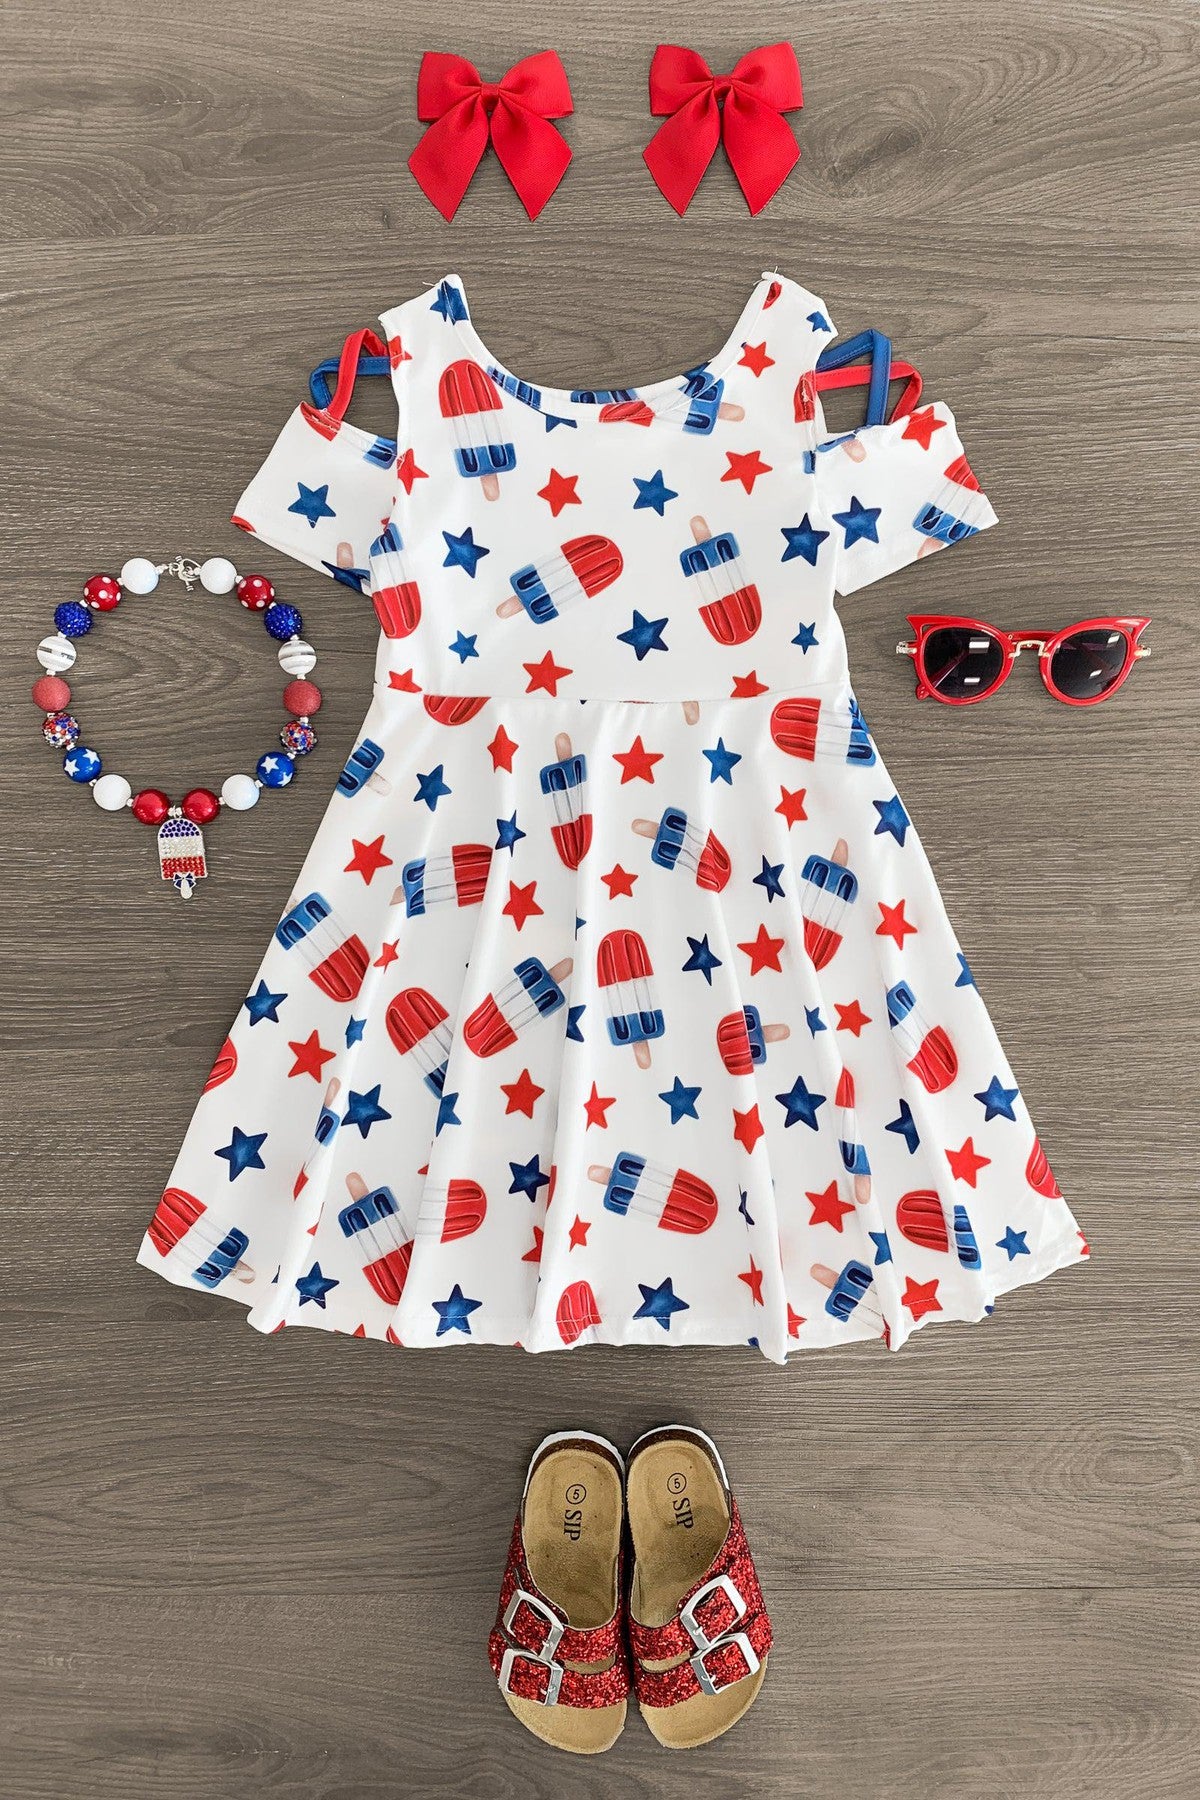 Red White & Blue Popsicle Dress - Sparkle in Pink